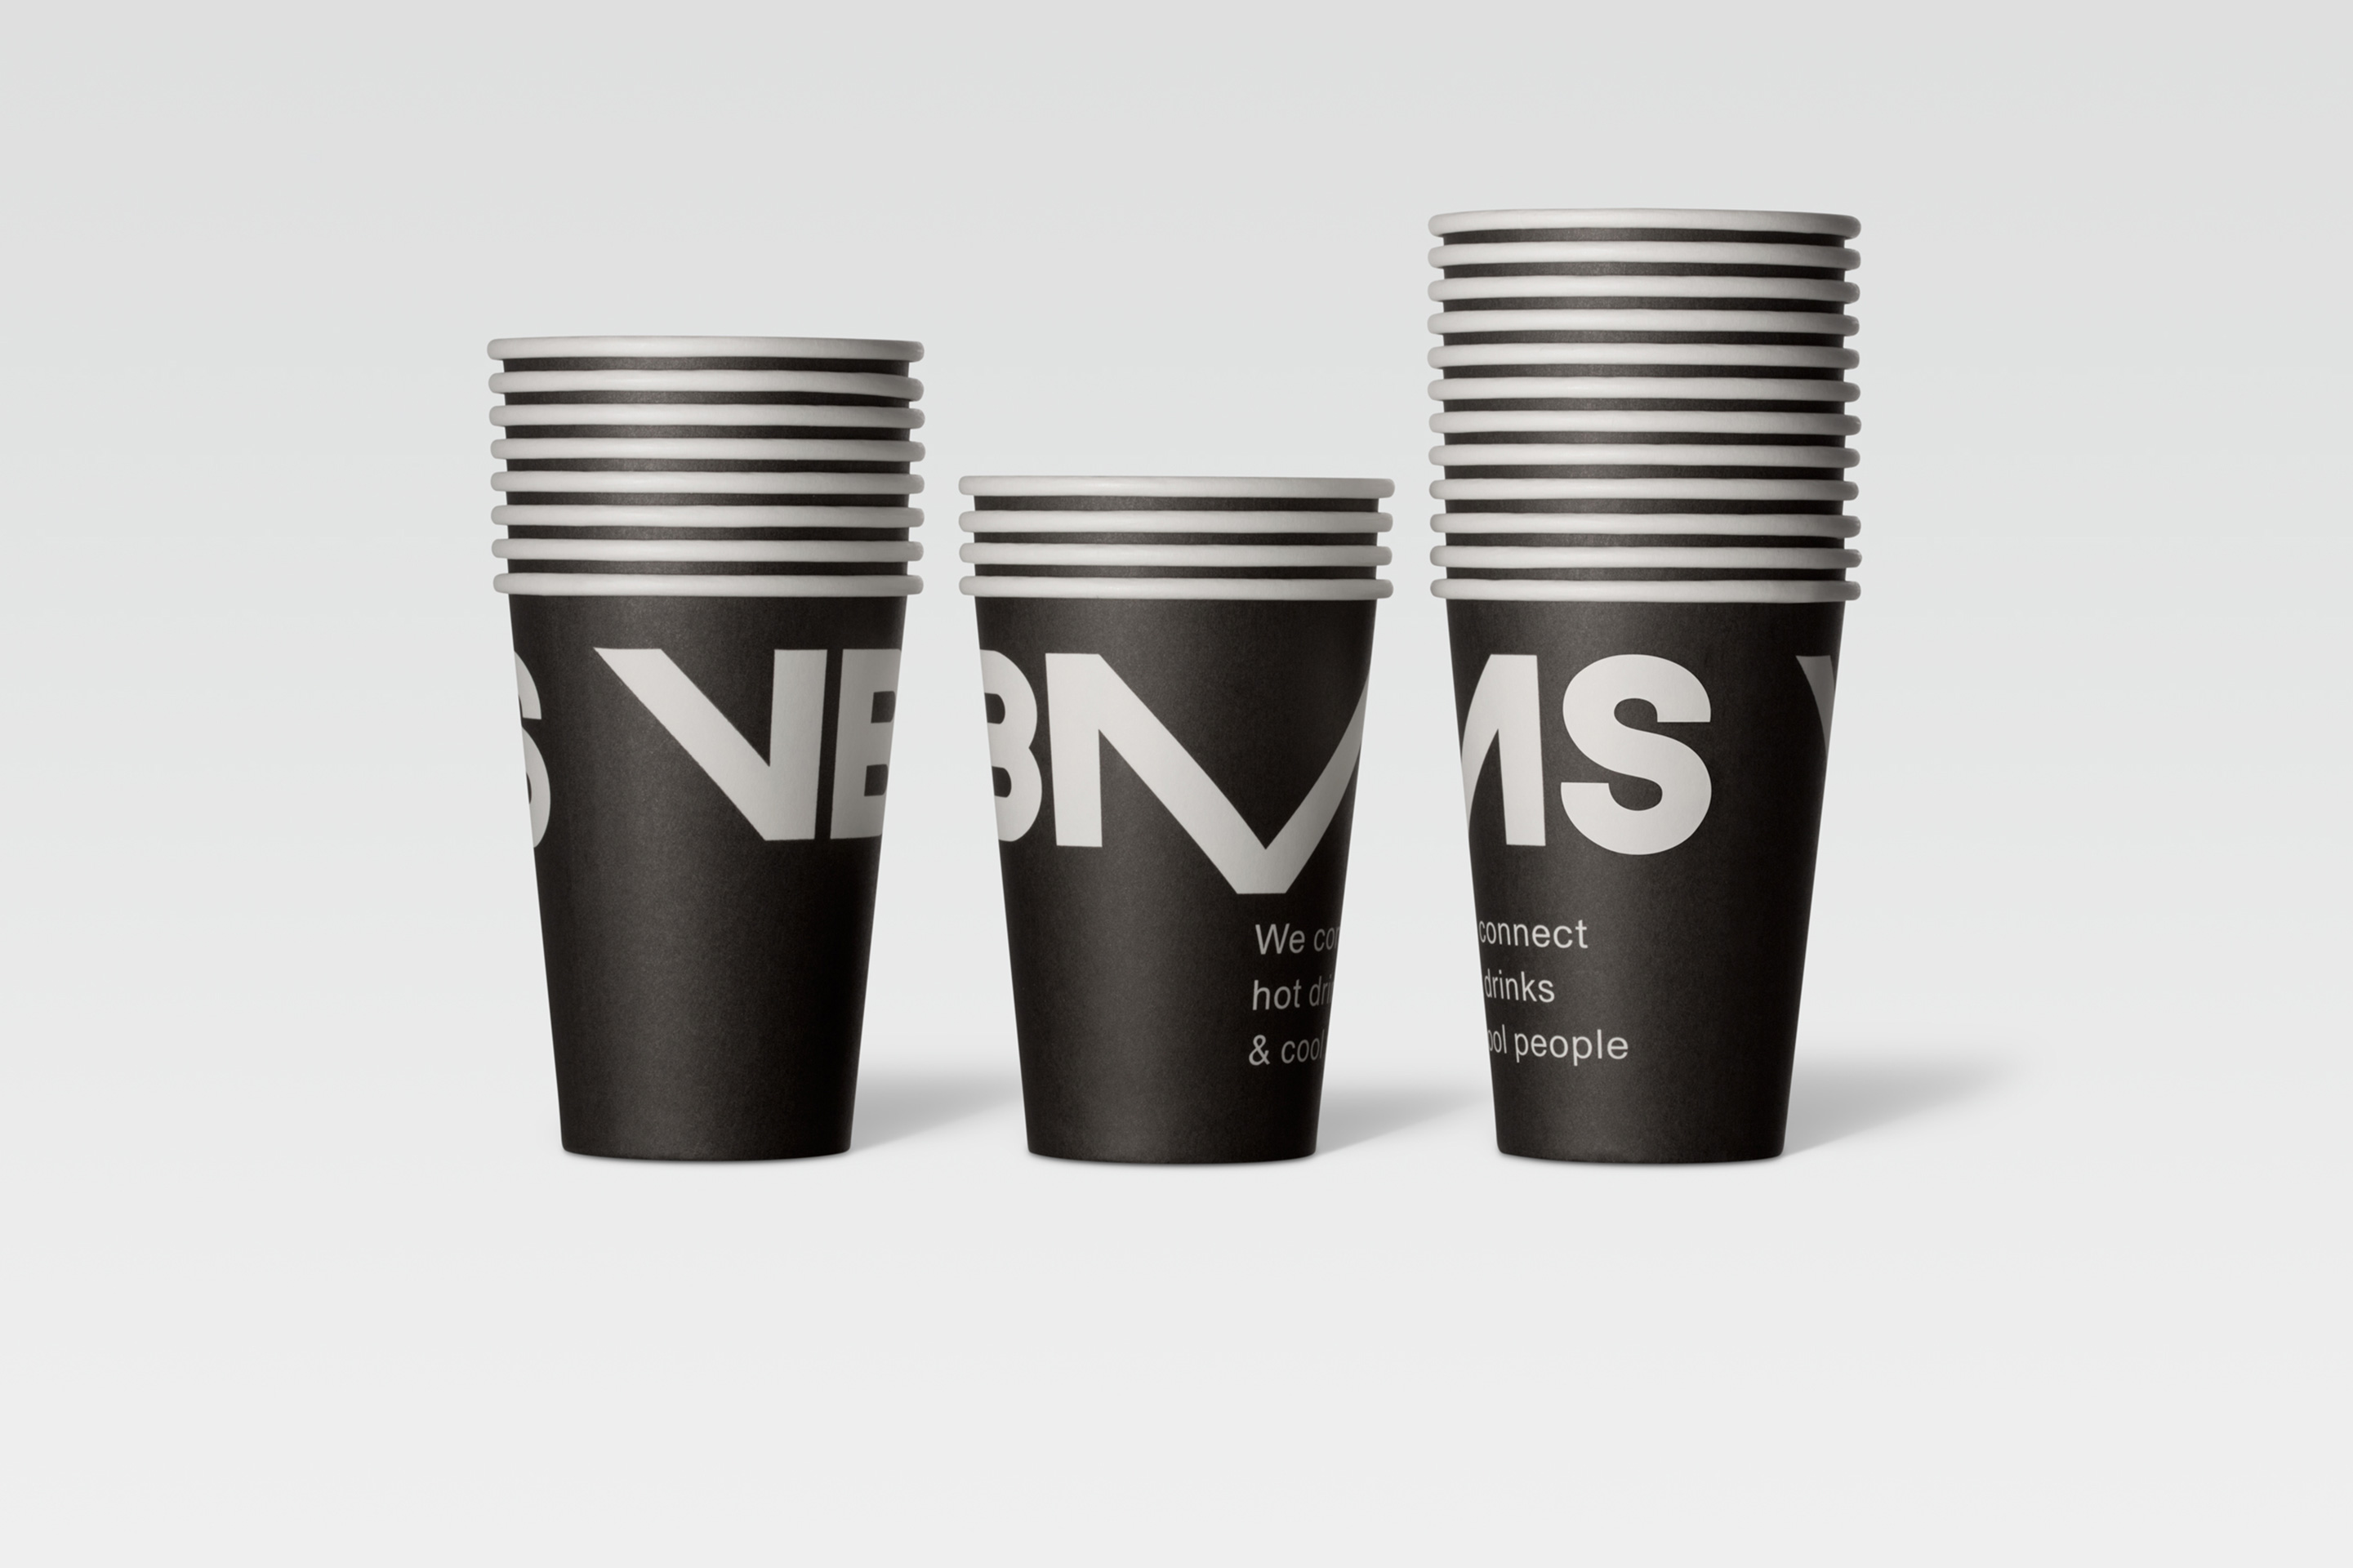 Logotype and branded coffee cups by Studio Dumbar for VBMS